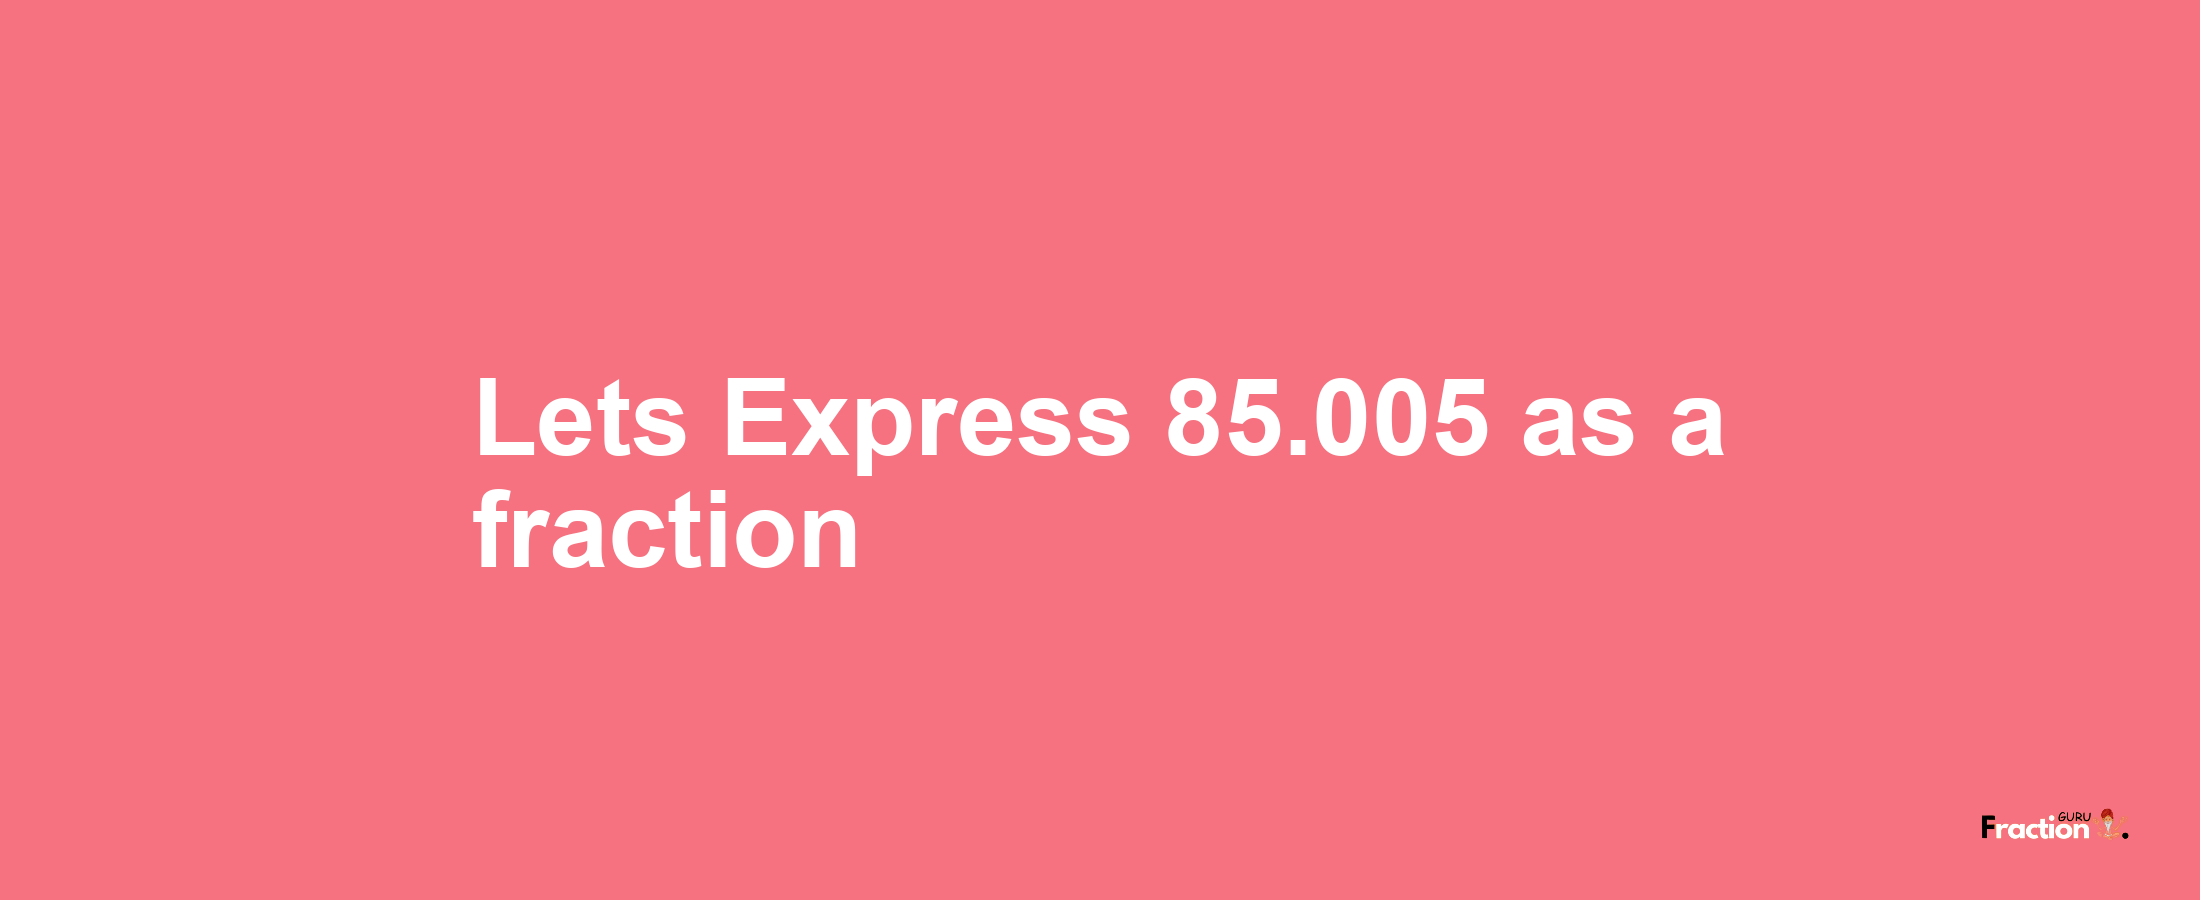 Lets Express 85.005 as afraction